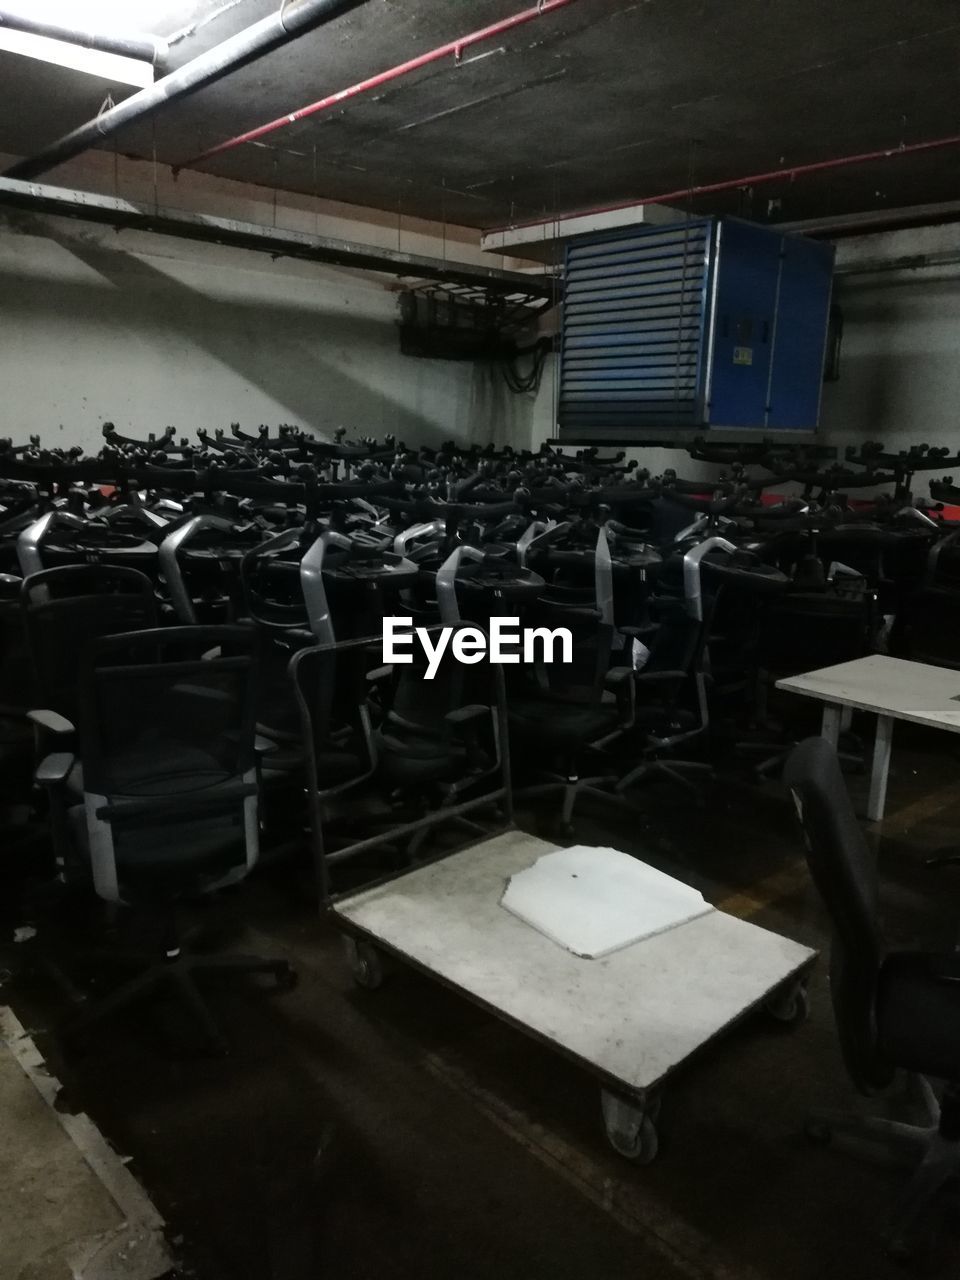 VIEW OF EMPTY CHAIRS AND TABLES IN ABANDONED ROOM